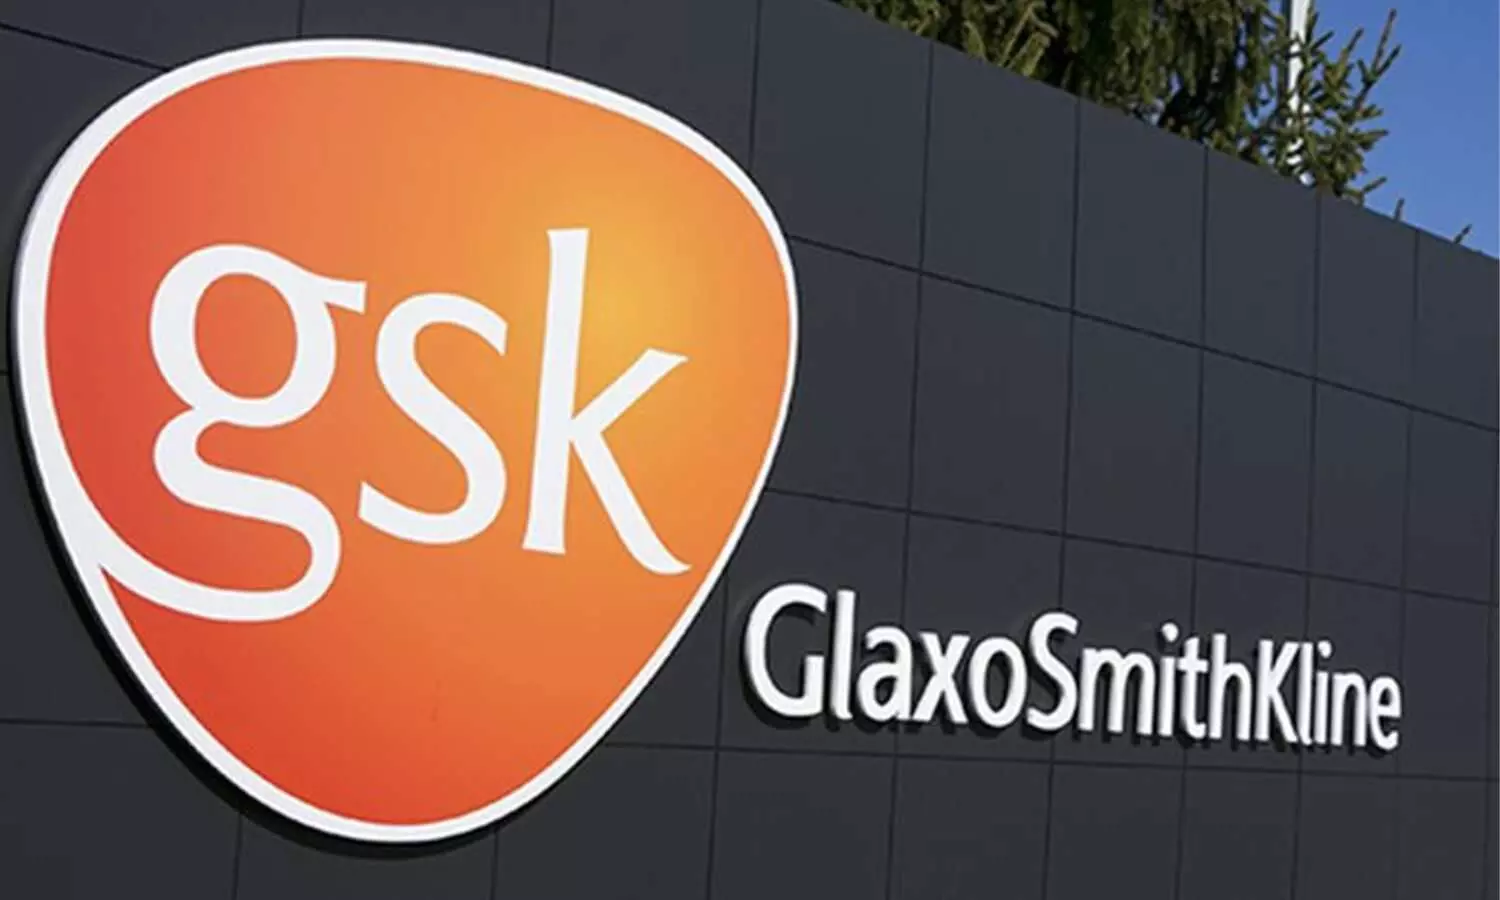 GlaxoSmithKline Pharma reports 9.45 percent rise in consolidated net profit at Rs 164.56 crore in Q3